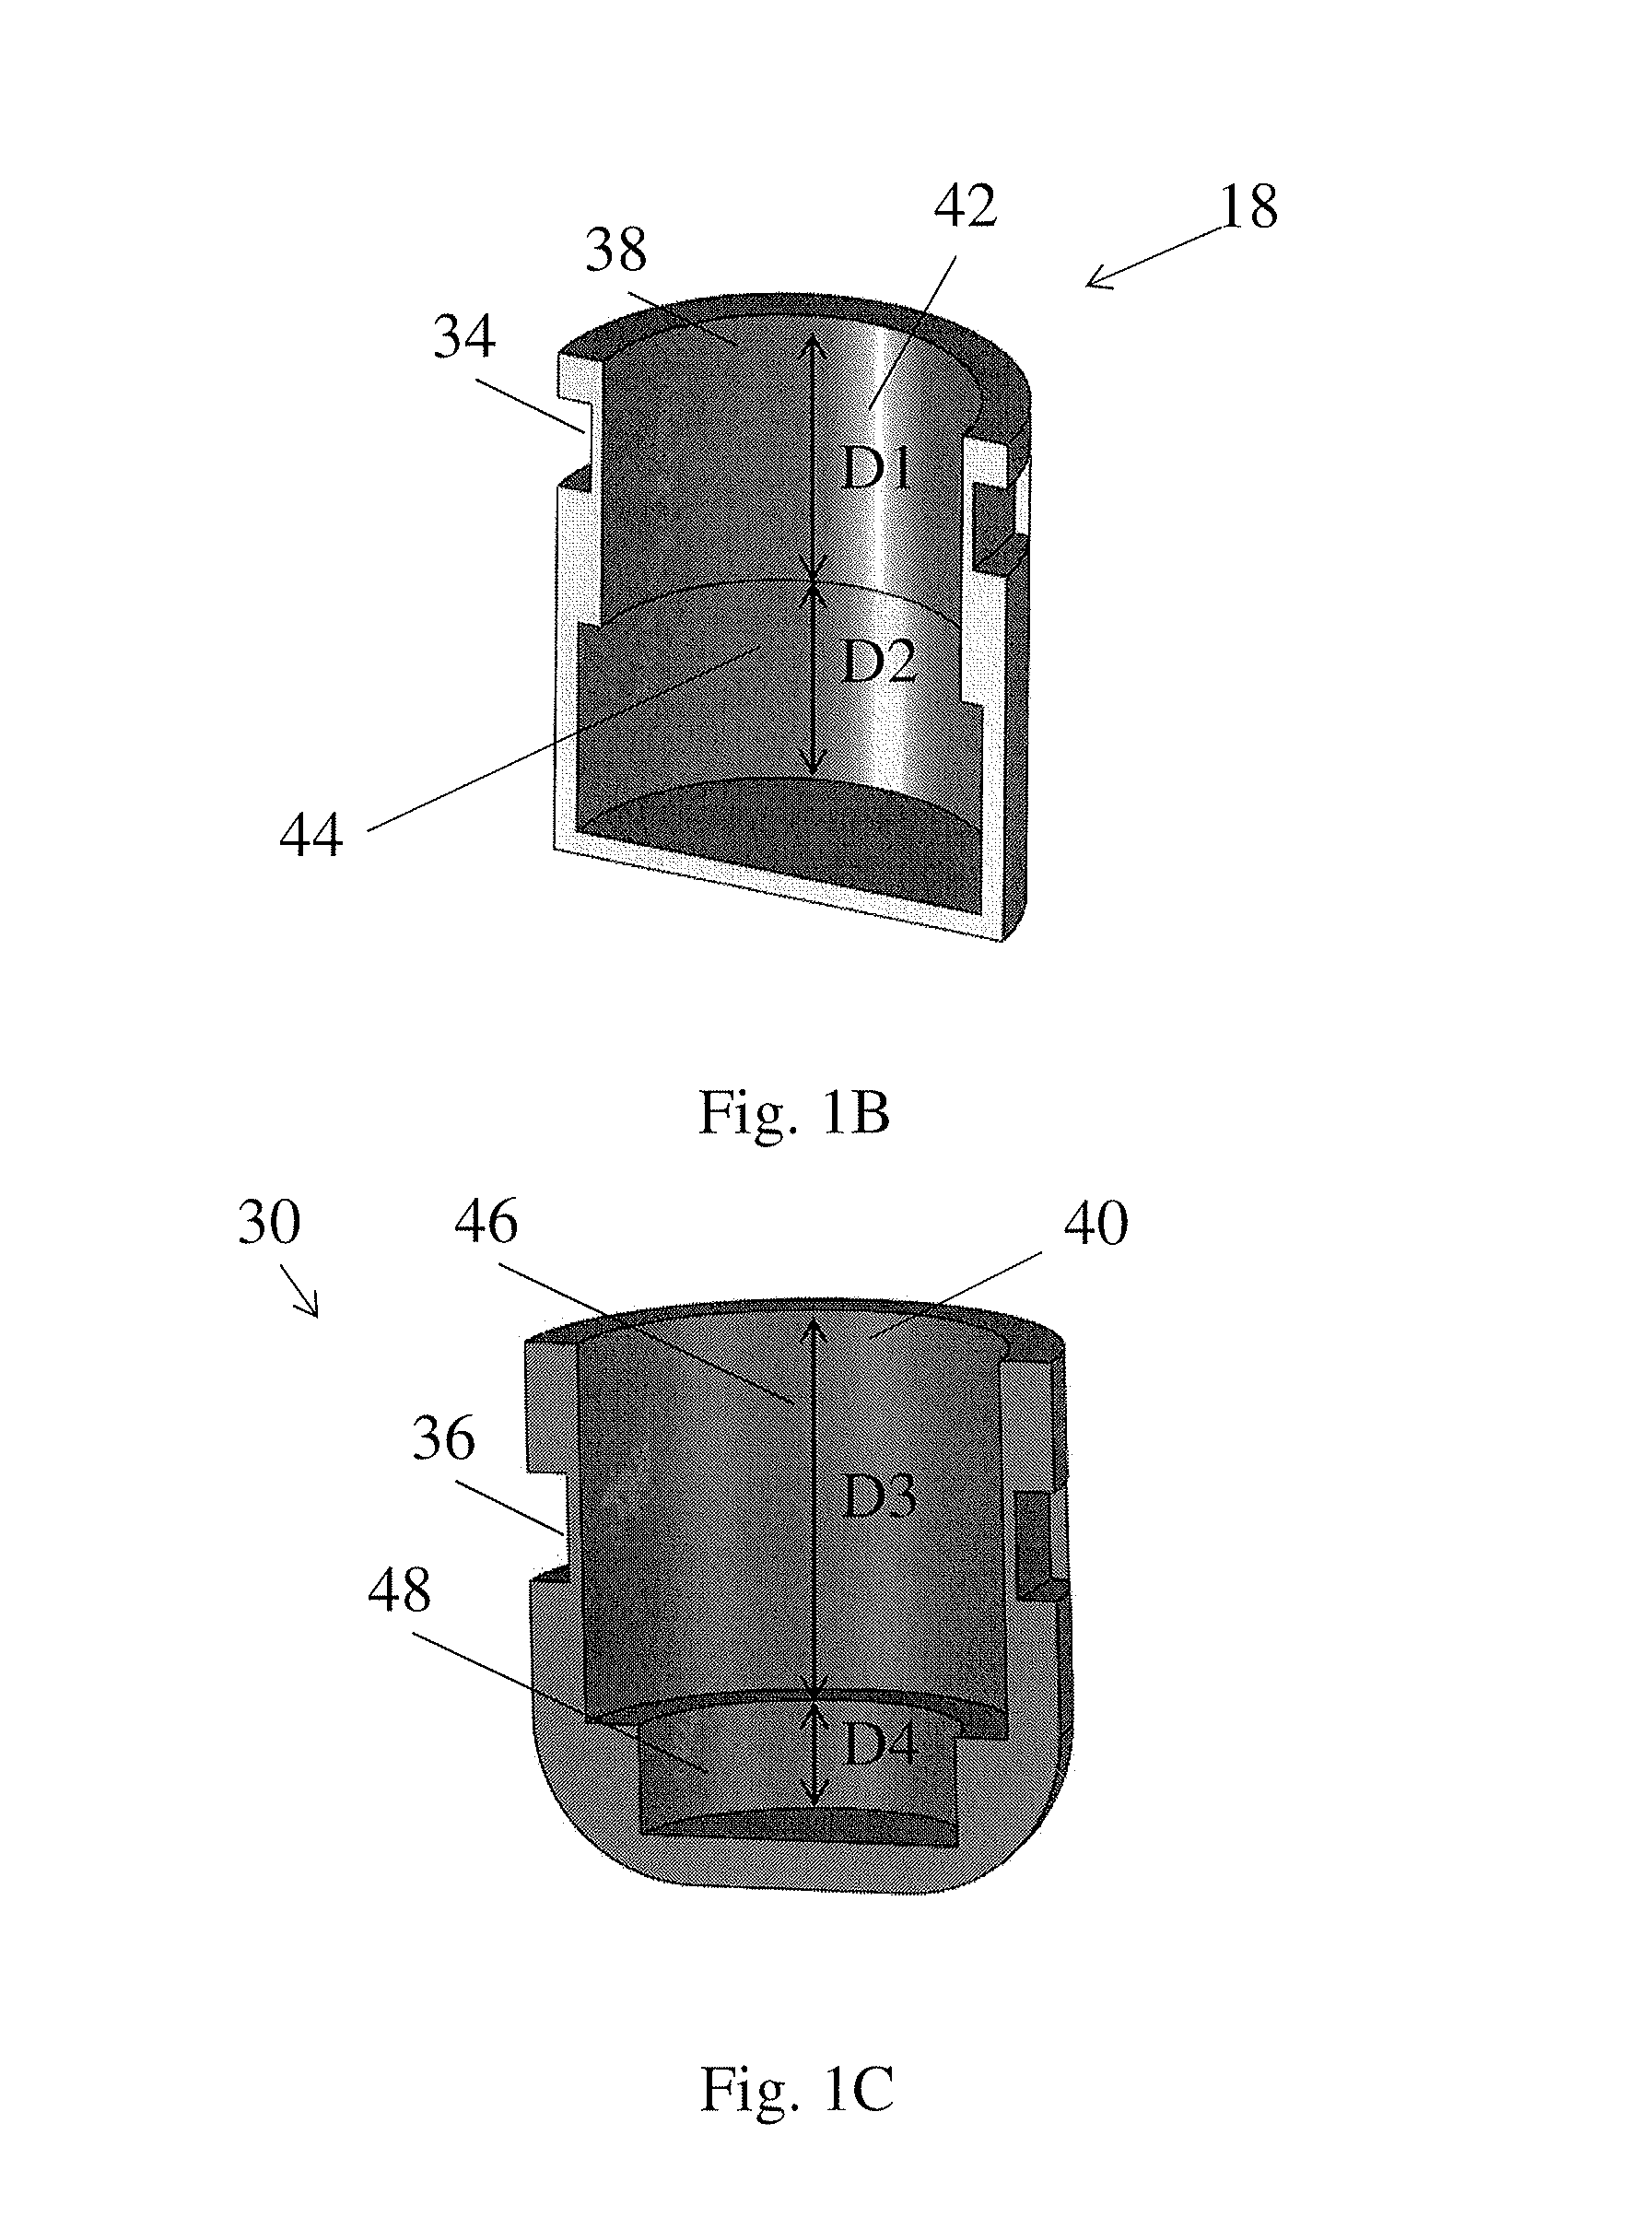 System and method to magnetically actuate a capsule endoscopic robot for diagnosis and treatment